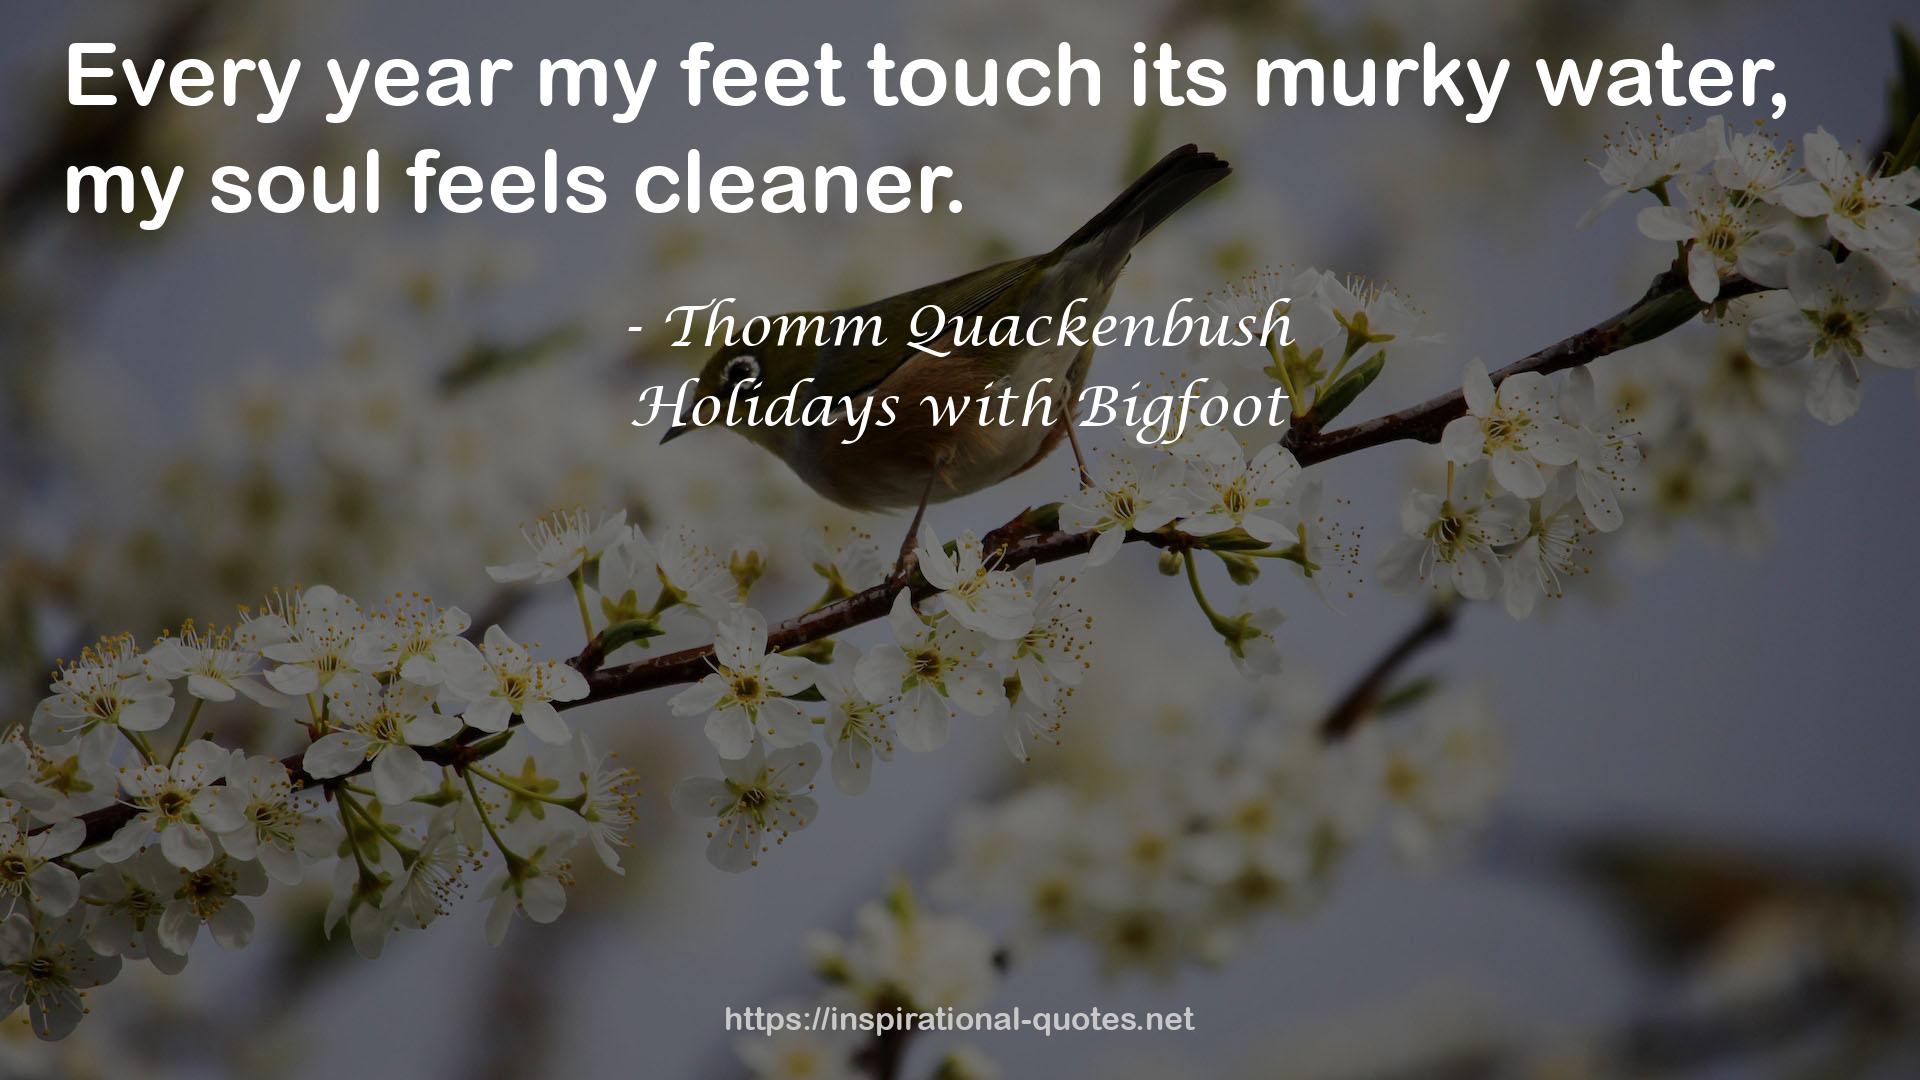 Holidays with Bigfoot QUOTES